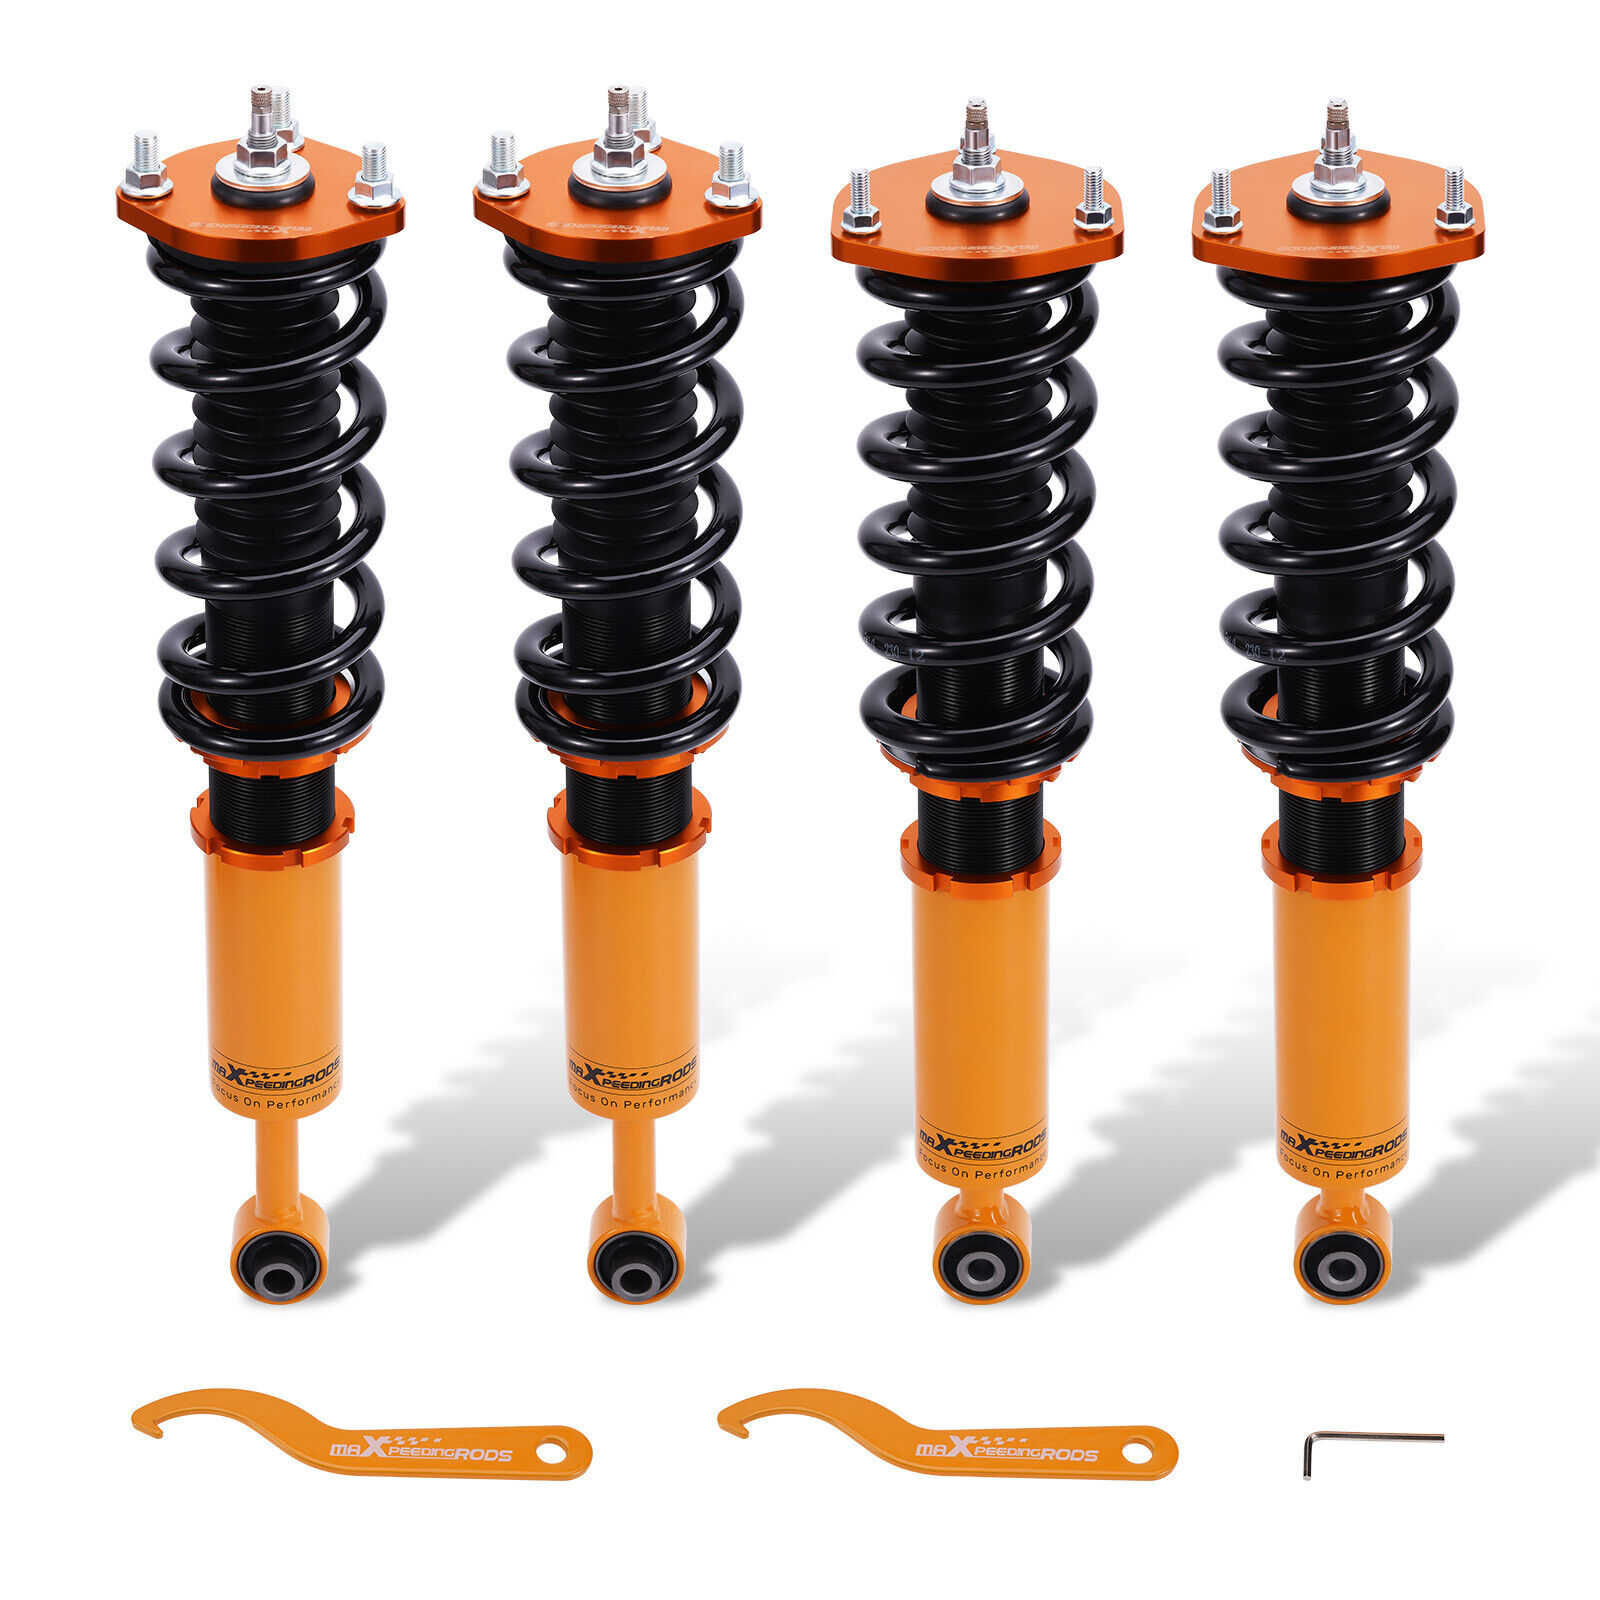 Full Assembly Coilovers Suspension Kits For Lexus IS300 2001-2005 Adj. Height